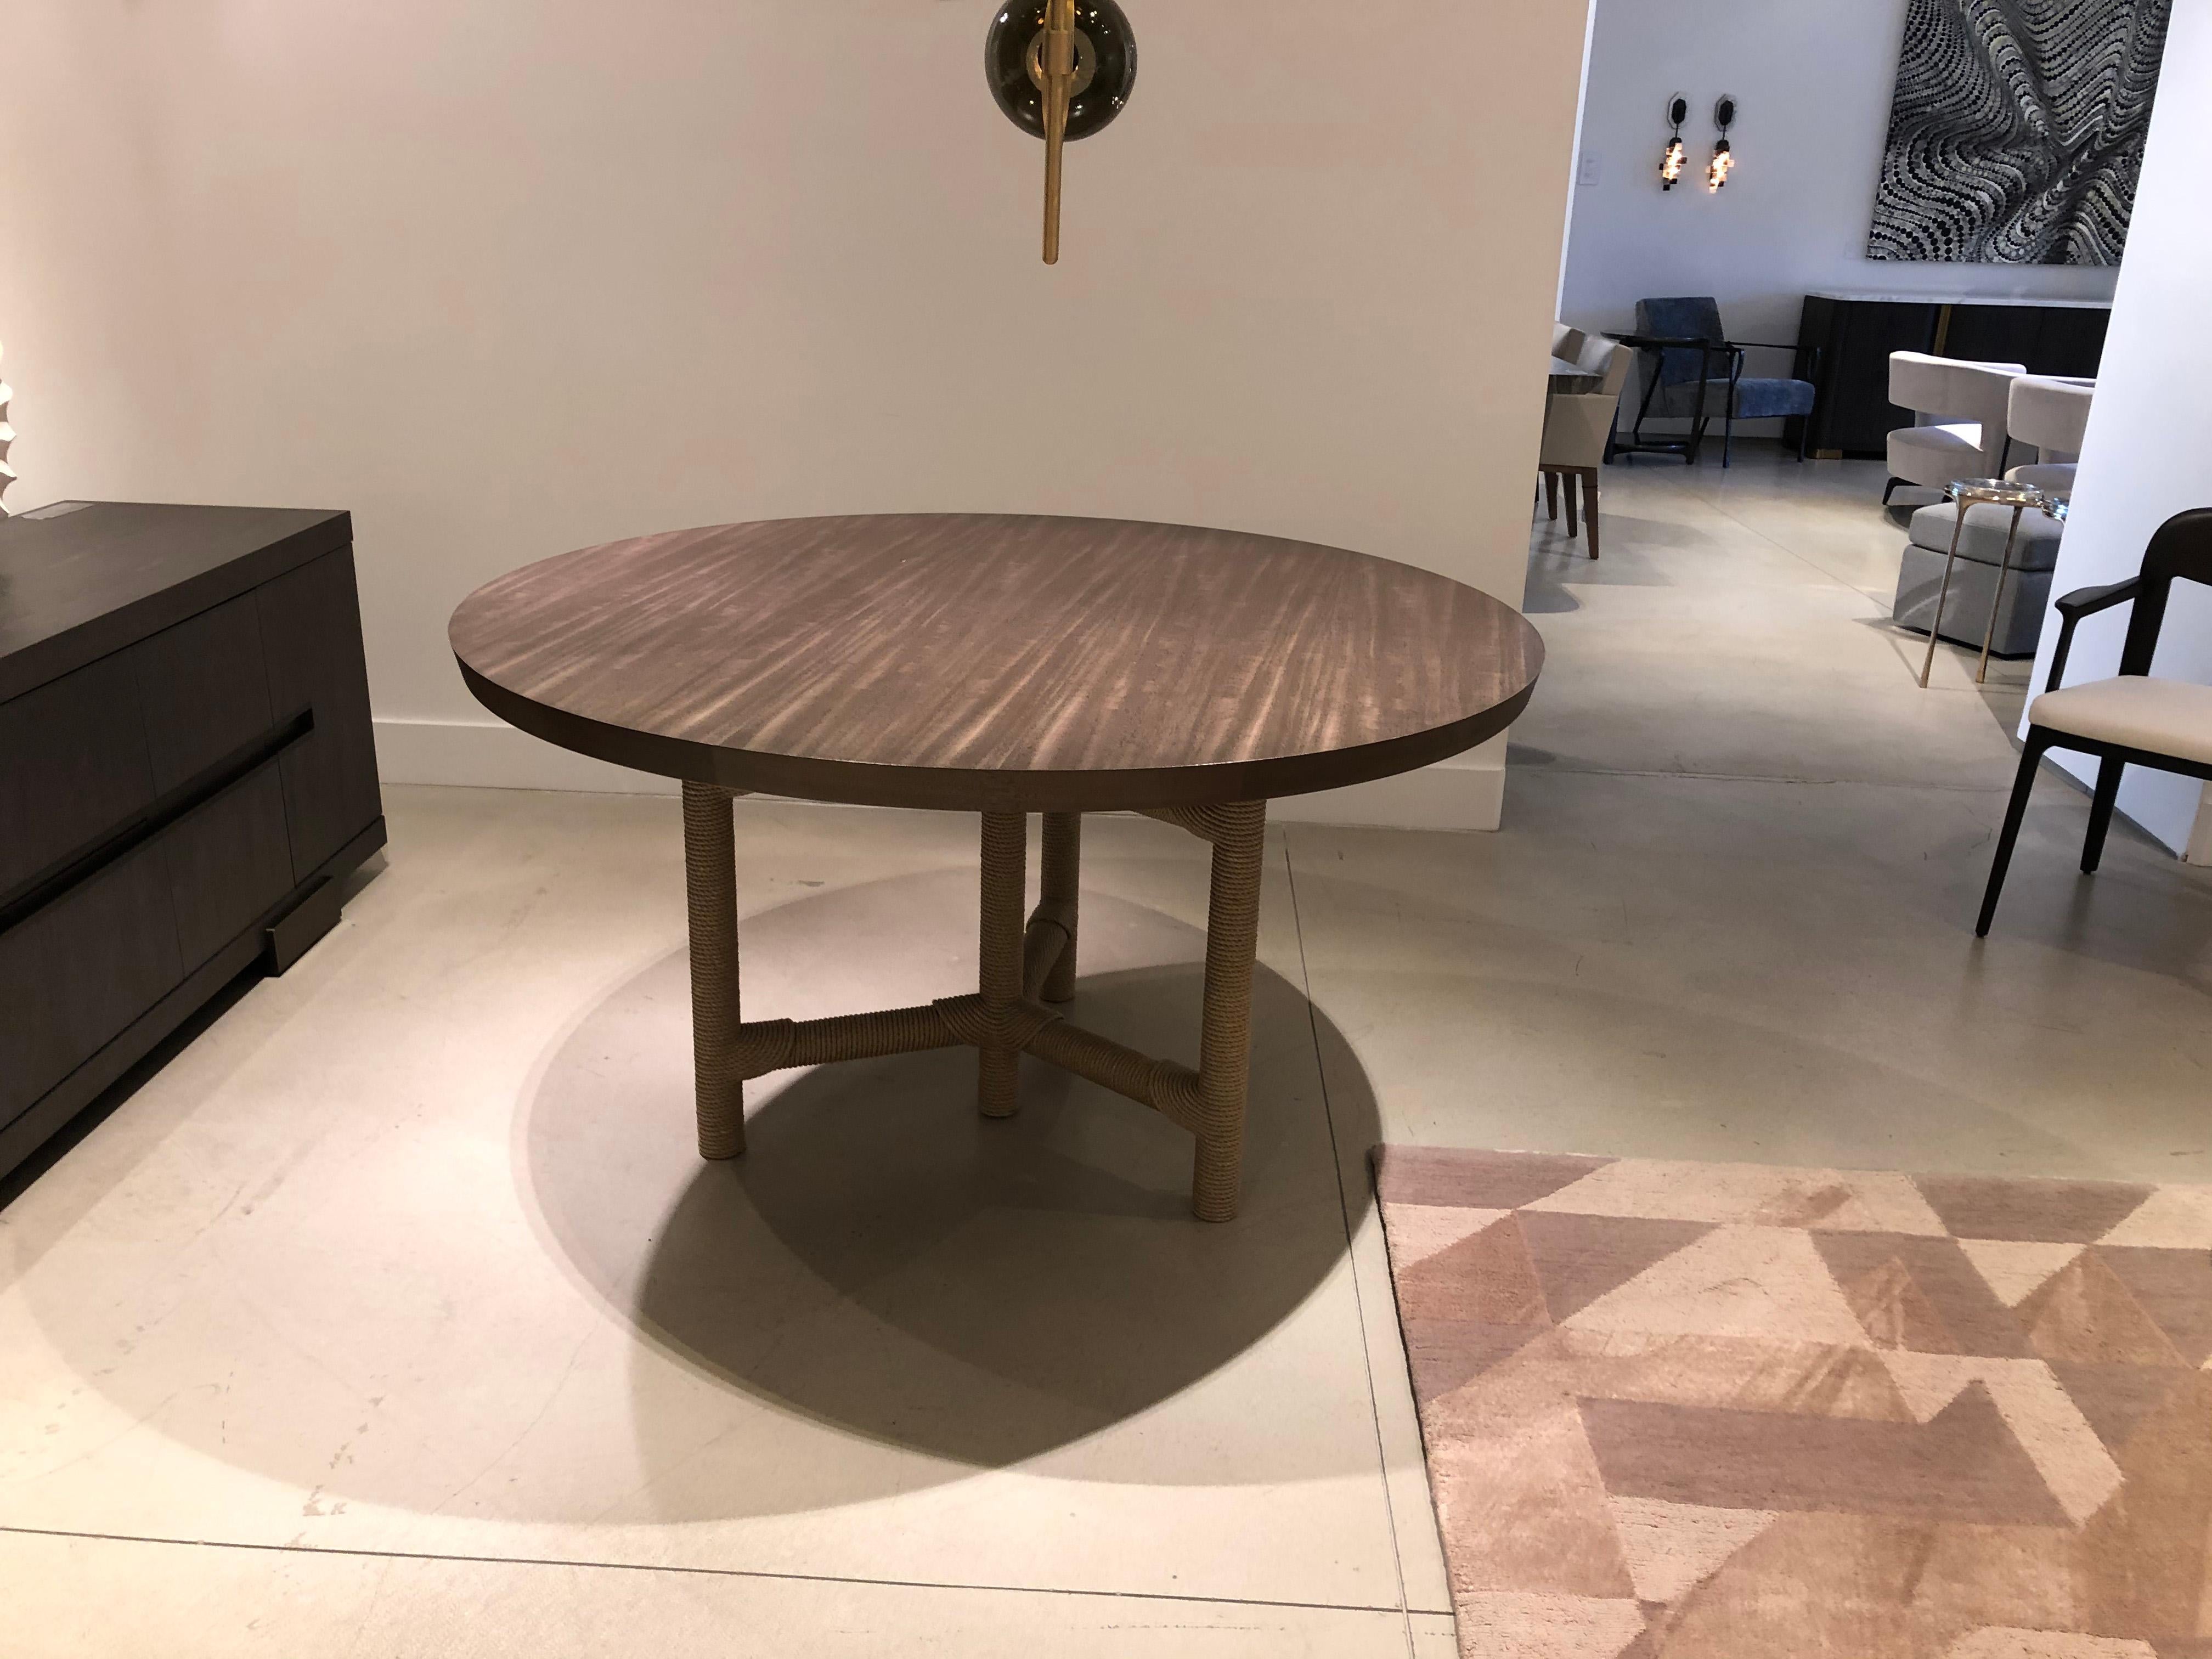 Holly Hunt Afriba Table in Paldao 185 by Christian Astuguevieille

Additional Information:
Dimensions: 57 Dia x 29.9 H inch